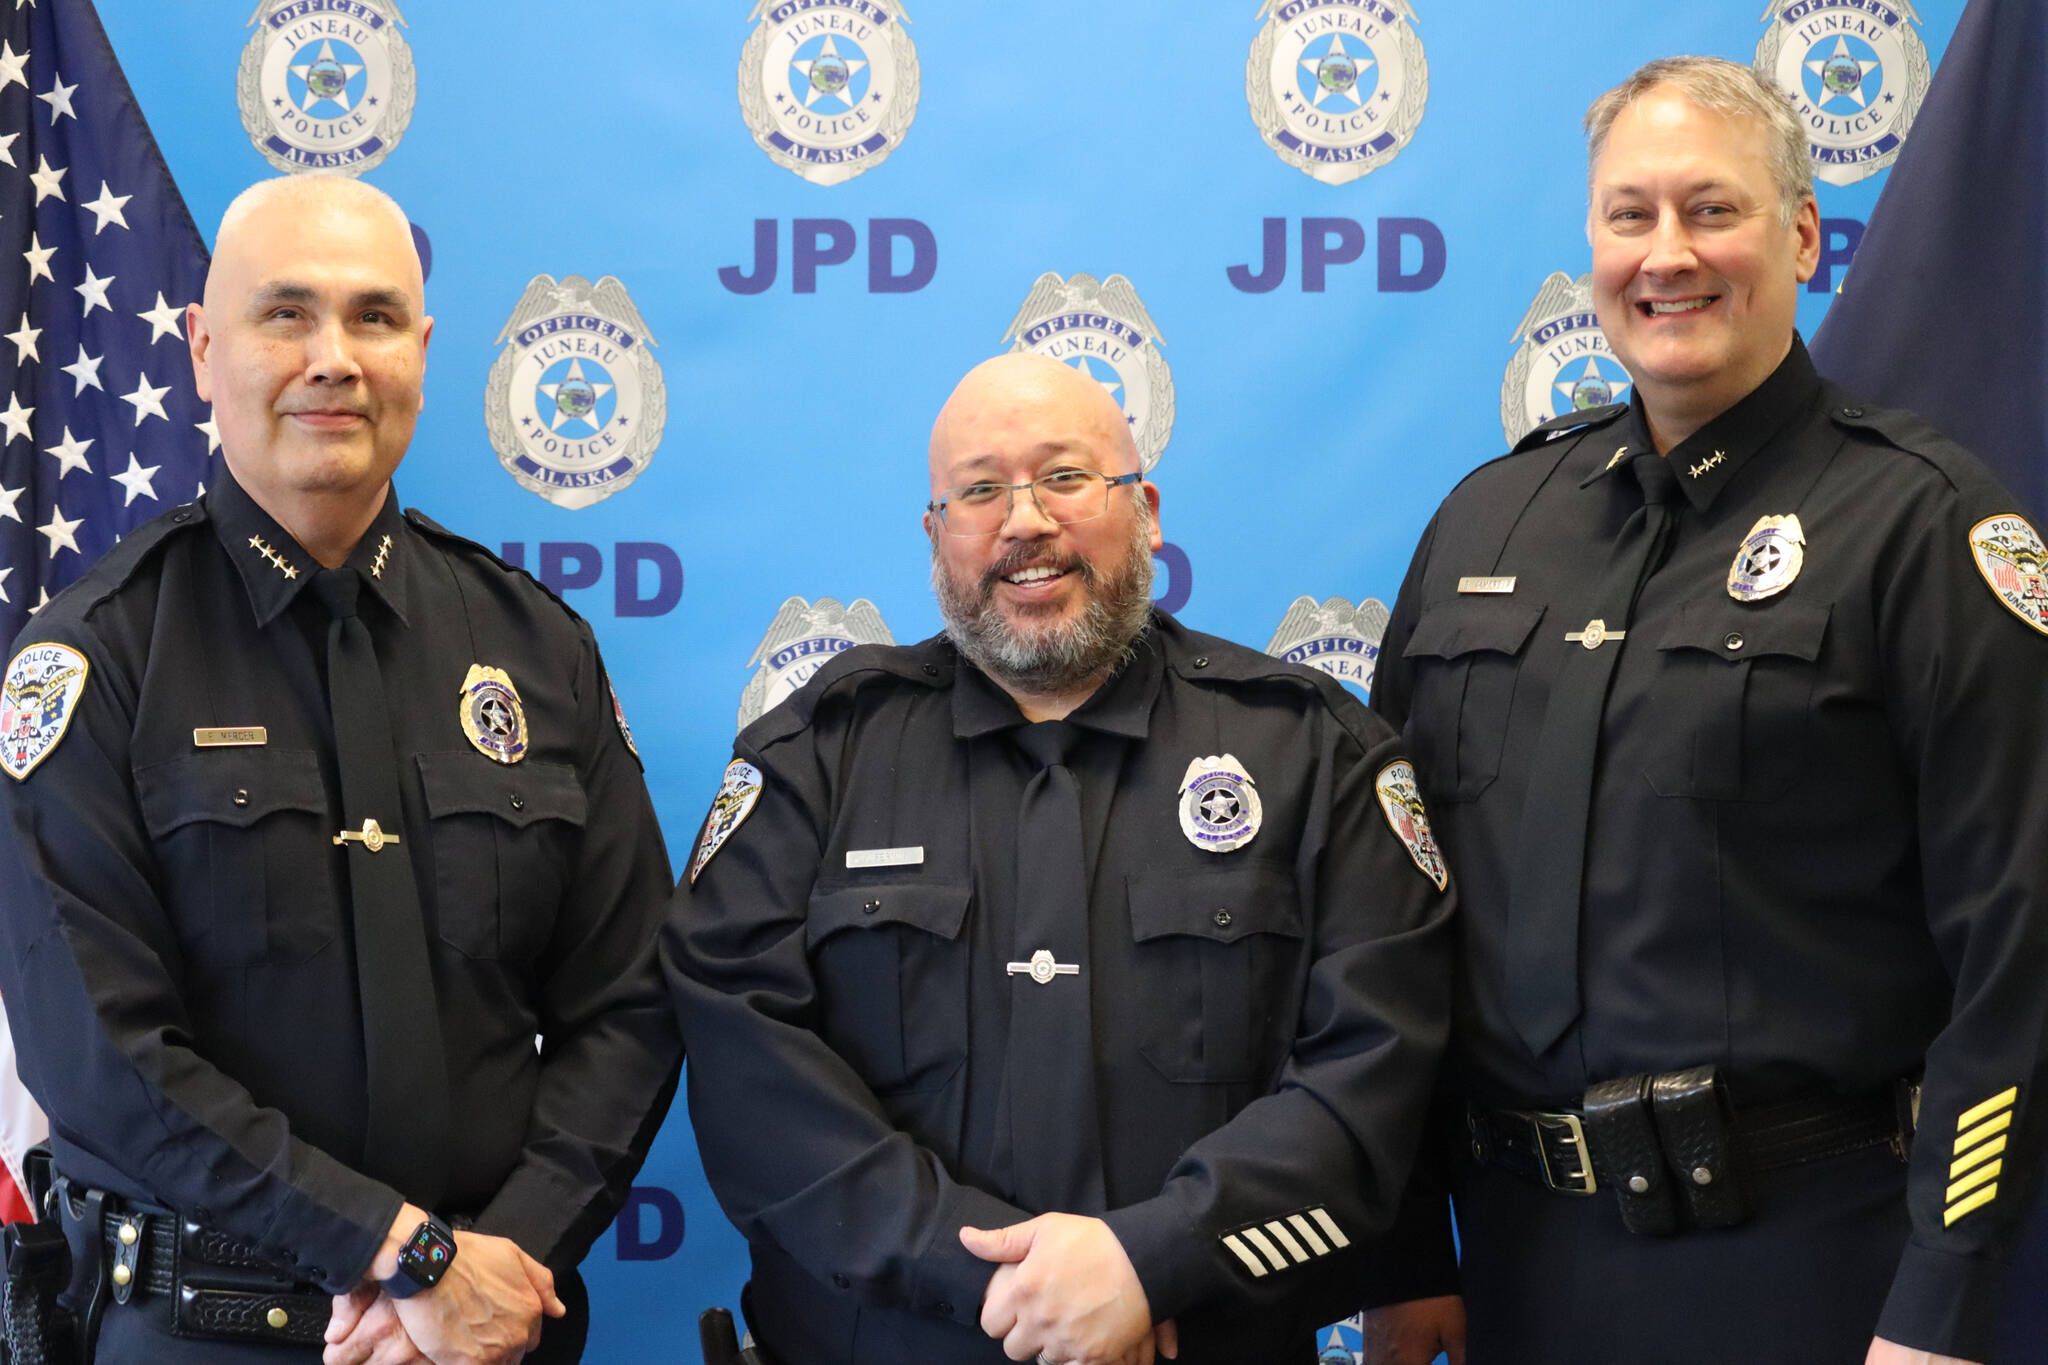 JPD Chief Ed Mercer, Officer Kevin Fermin and Deputy Chief David Campbell pose for a group photo on Friday during Fermin’s retirement ceremony at the Juneau Police Department. (Jonson Kuhn / Juneau Empire)